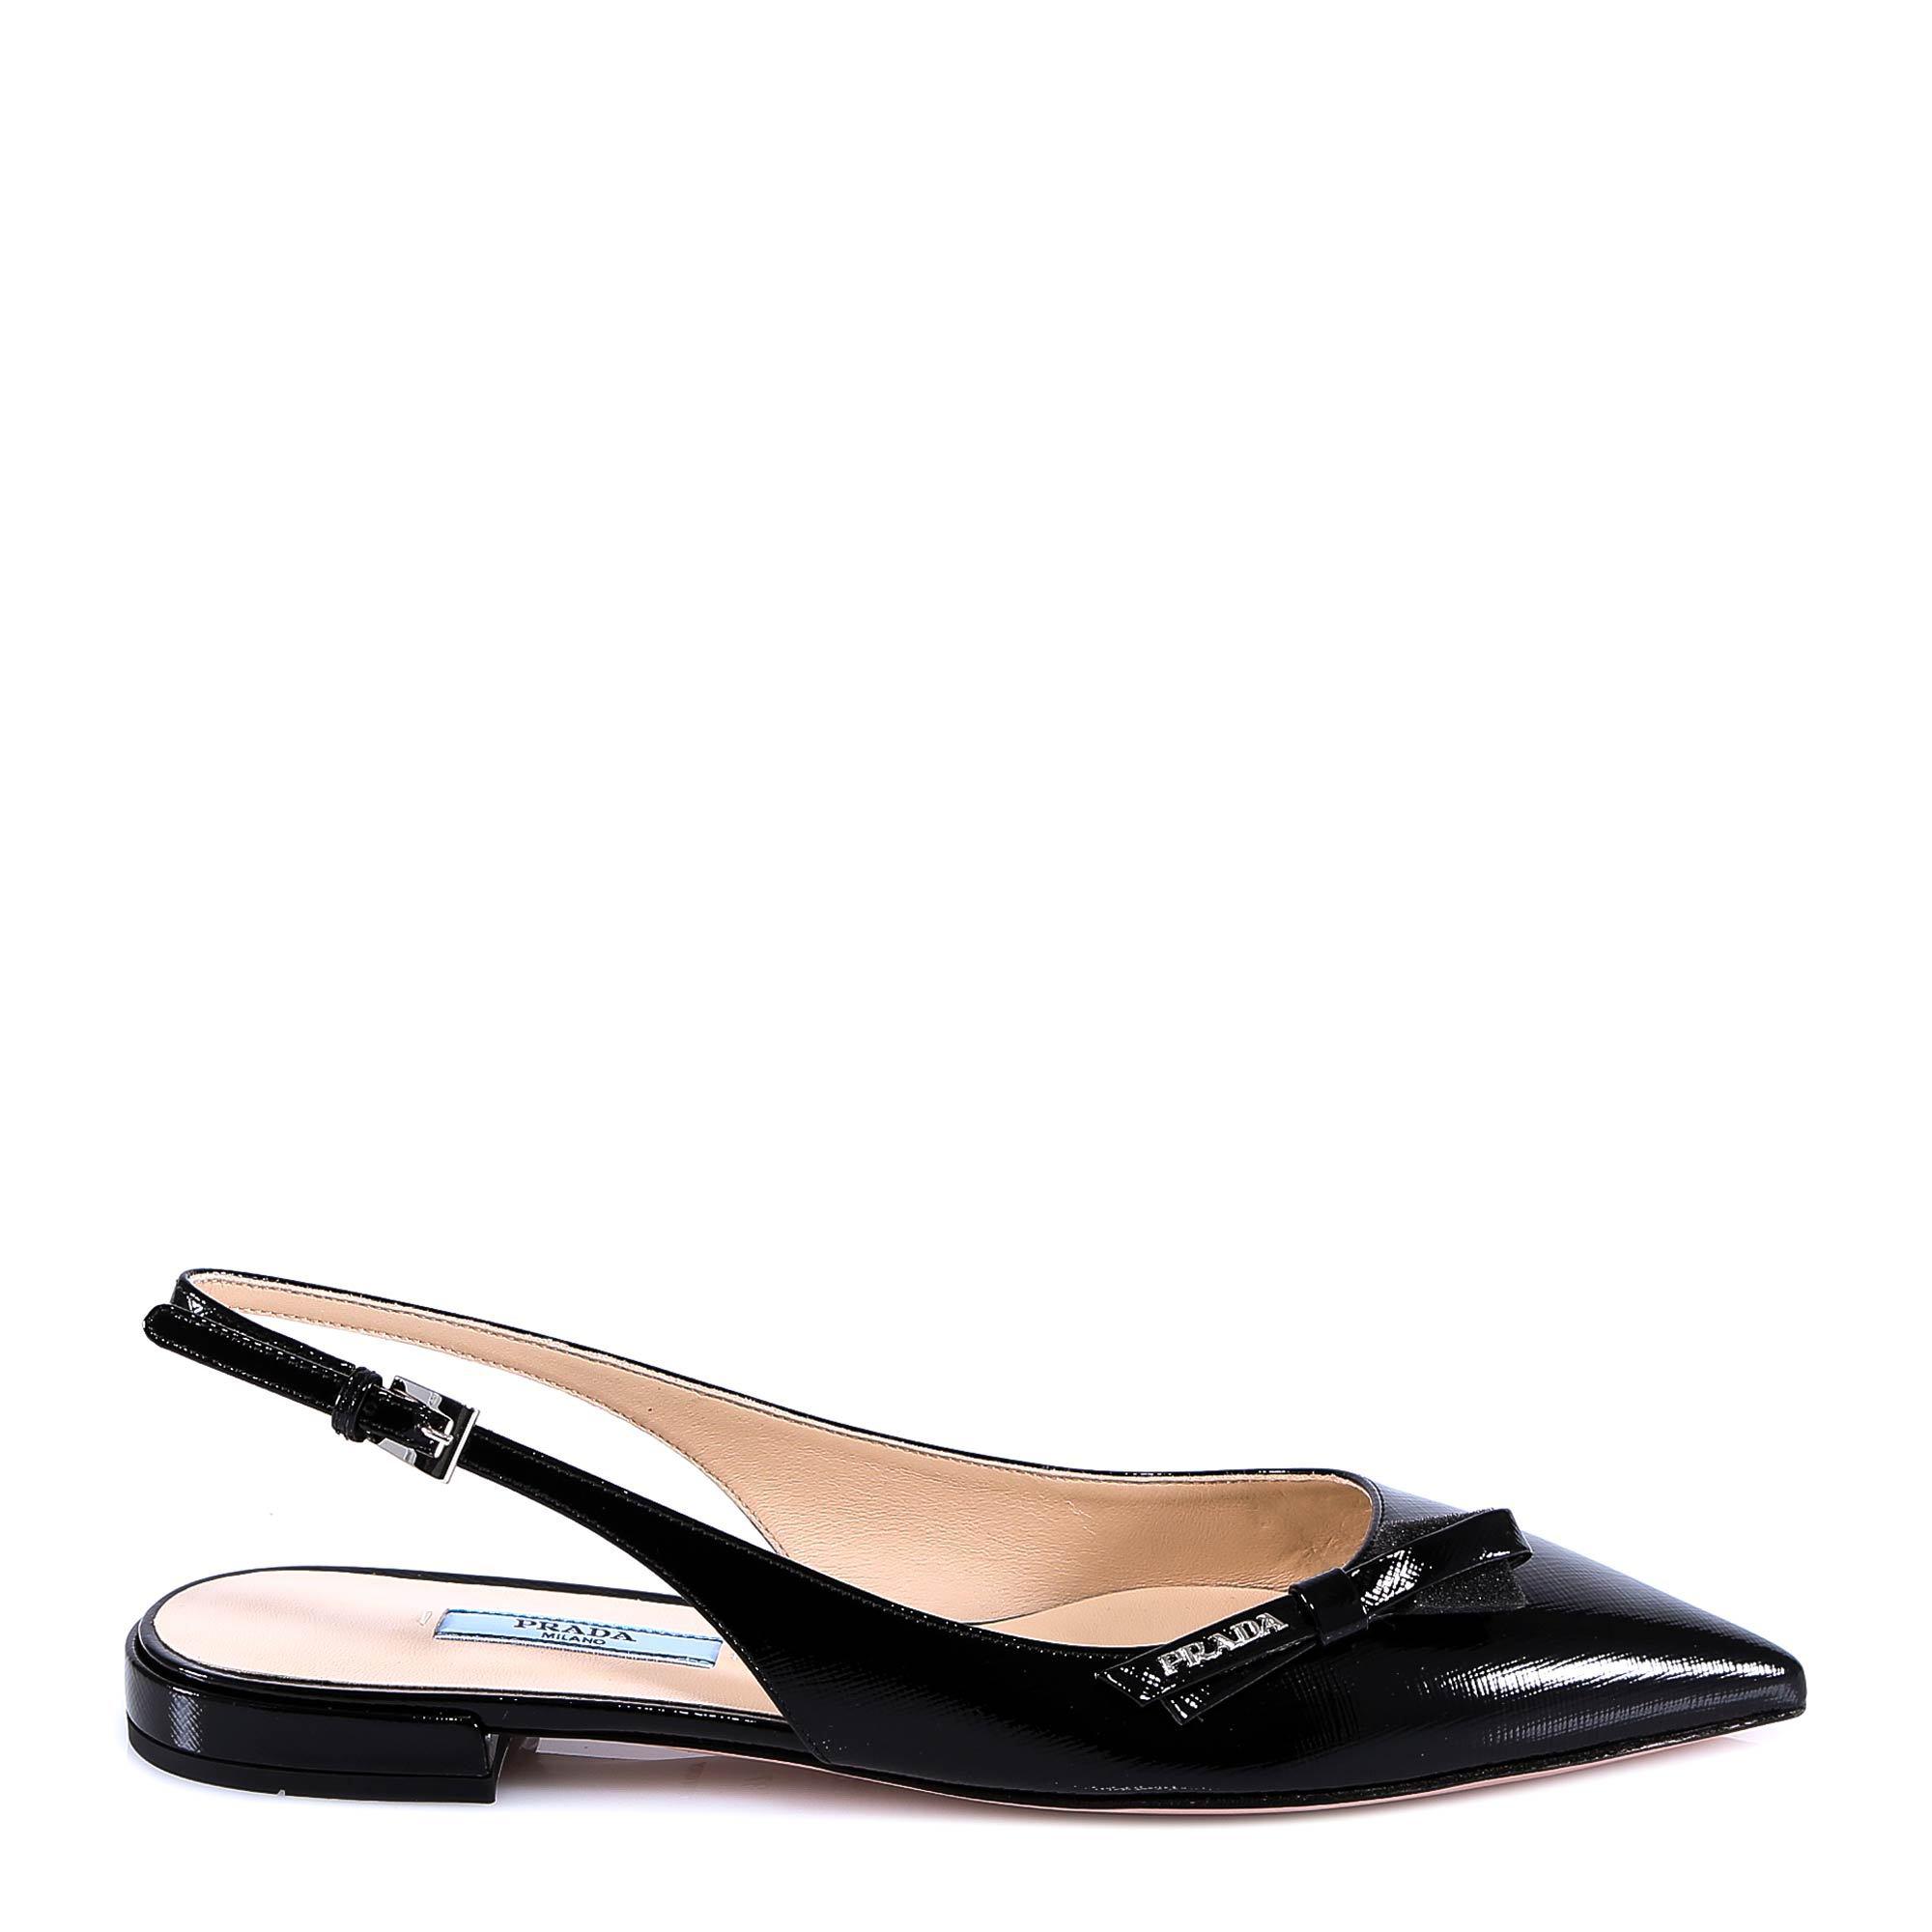 Prada Glossed Textured-leather Slingback Flats in Black - Lyst